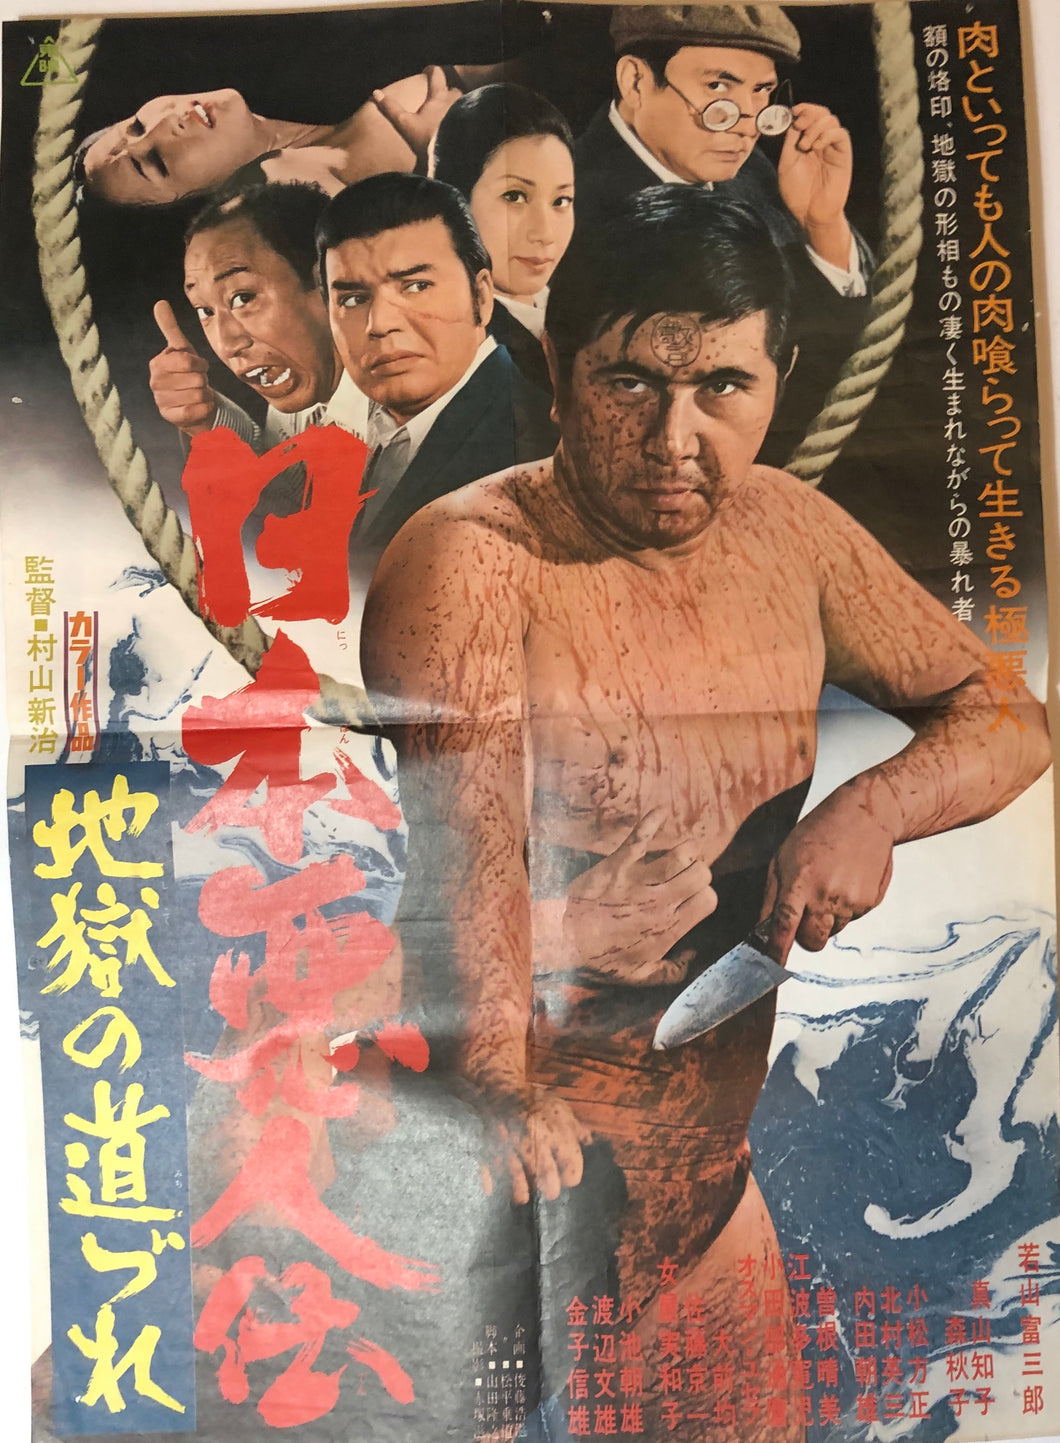 YAKUZA NUMBER 1: HIGHWAY TO HELL - (USED) MOVIE POSTER